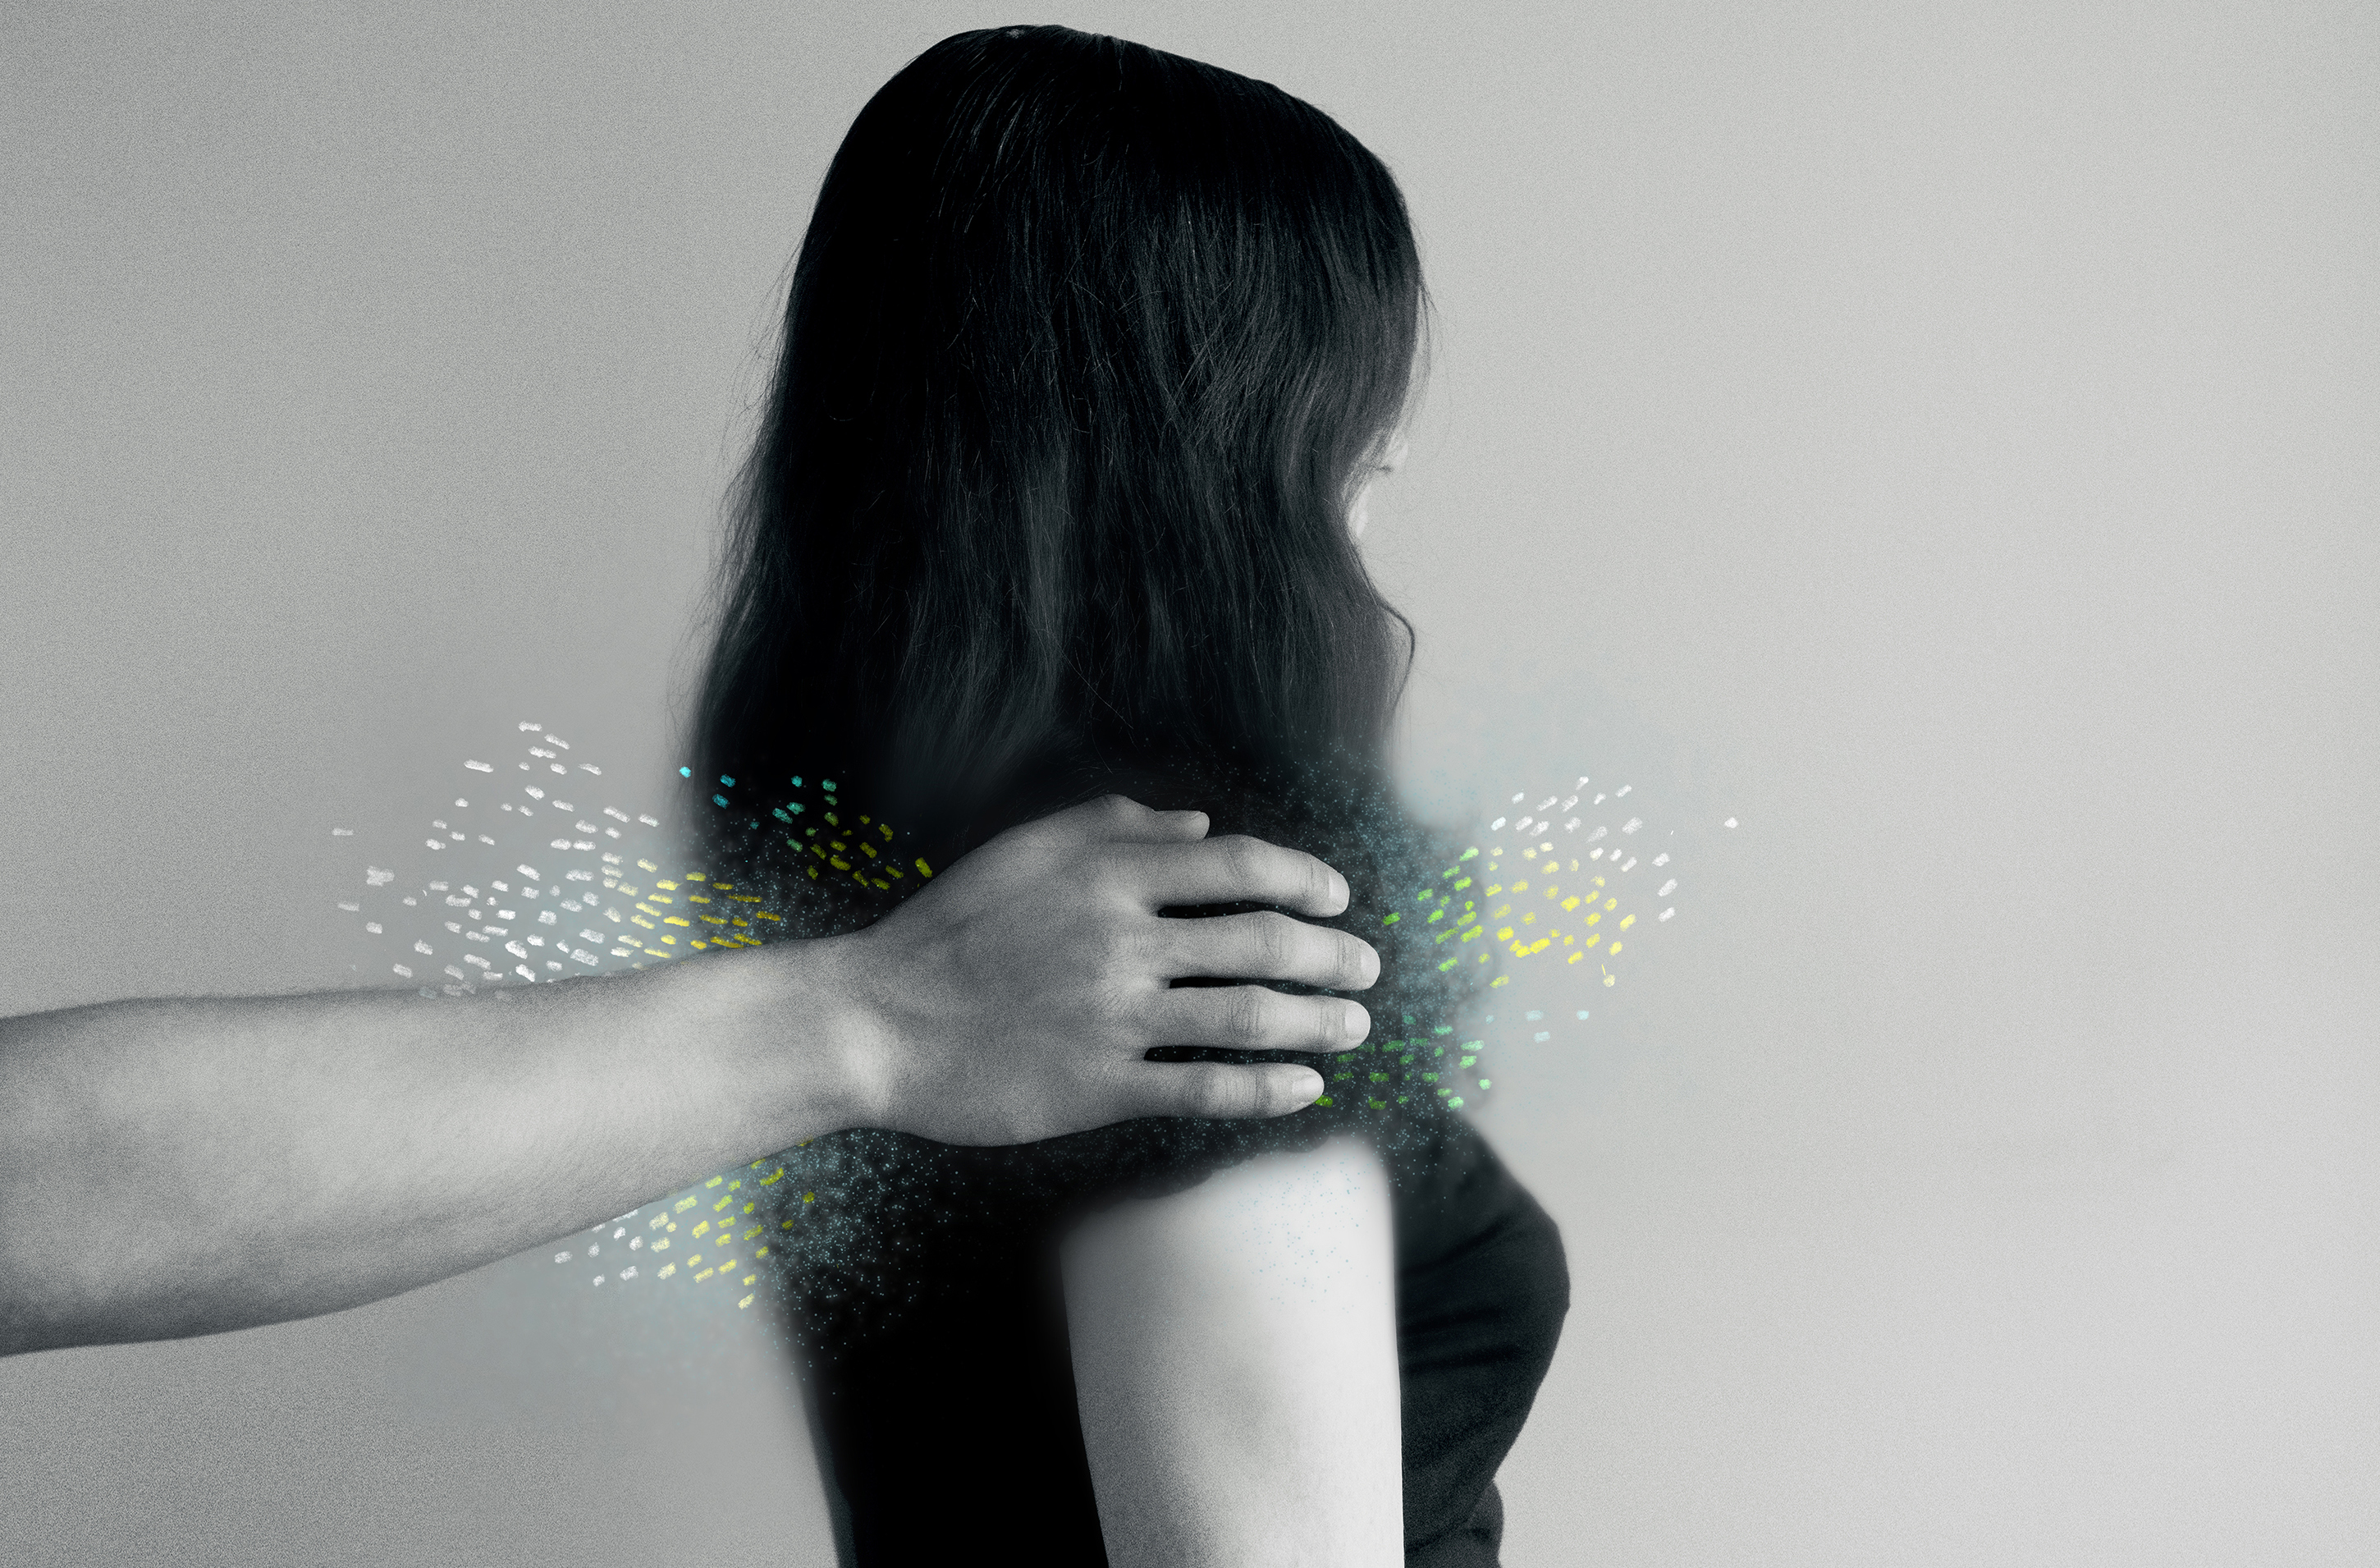 Photo shows a hand touching a woman's shoulder, with illustrated dots highlighting the point of contact.